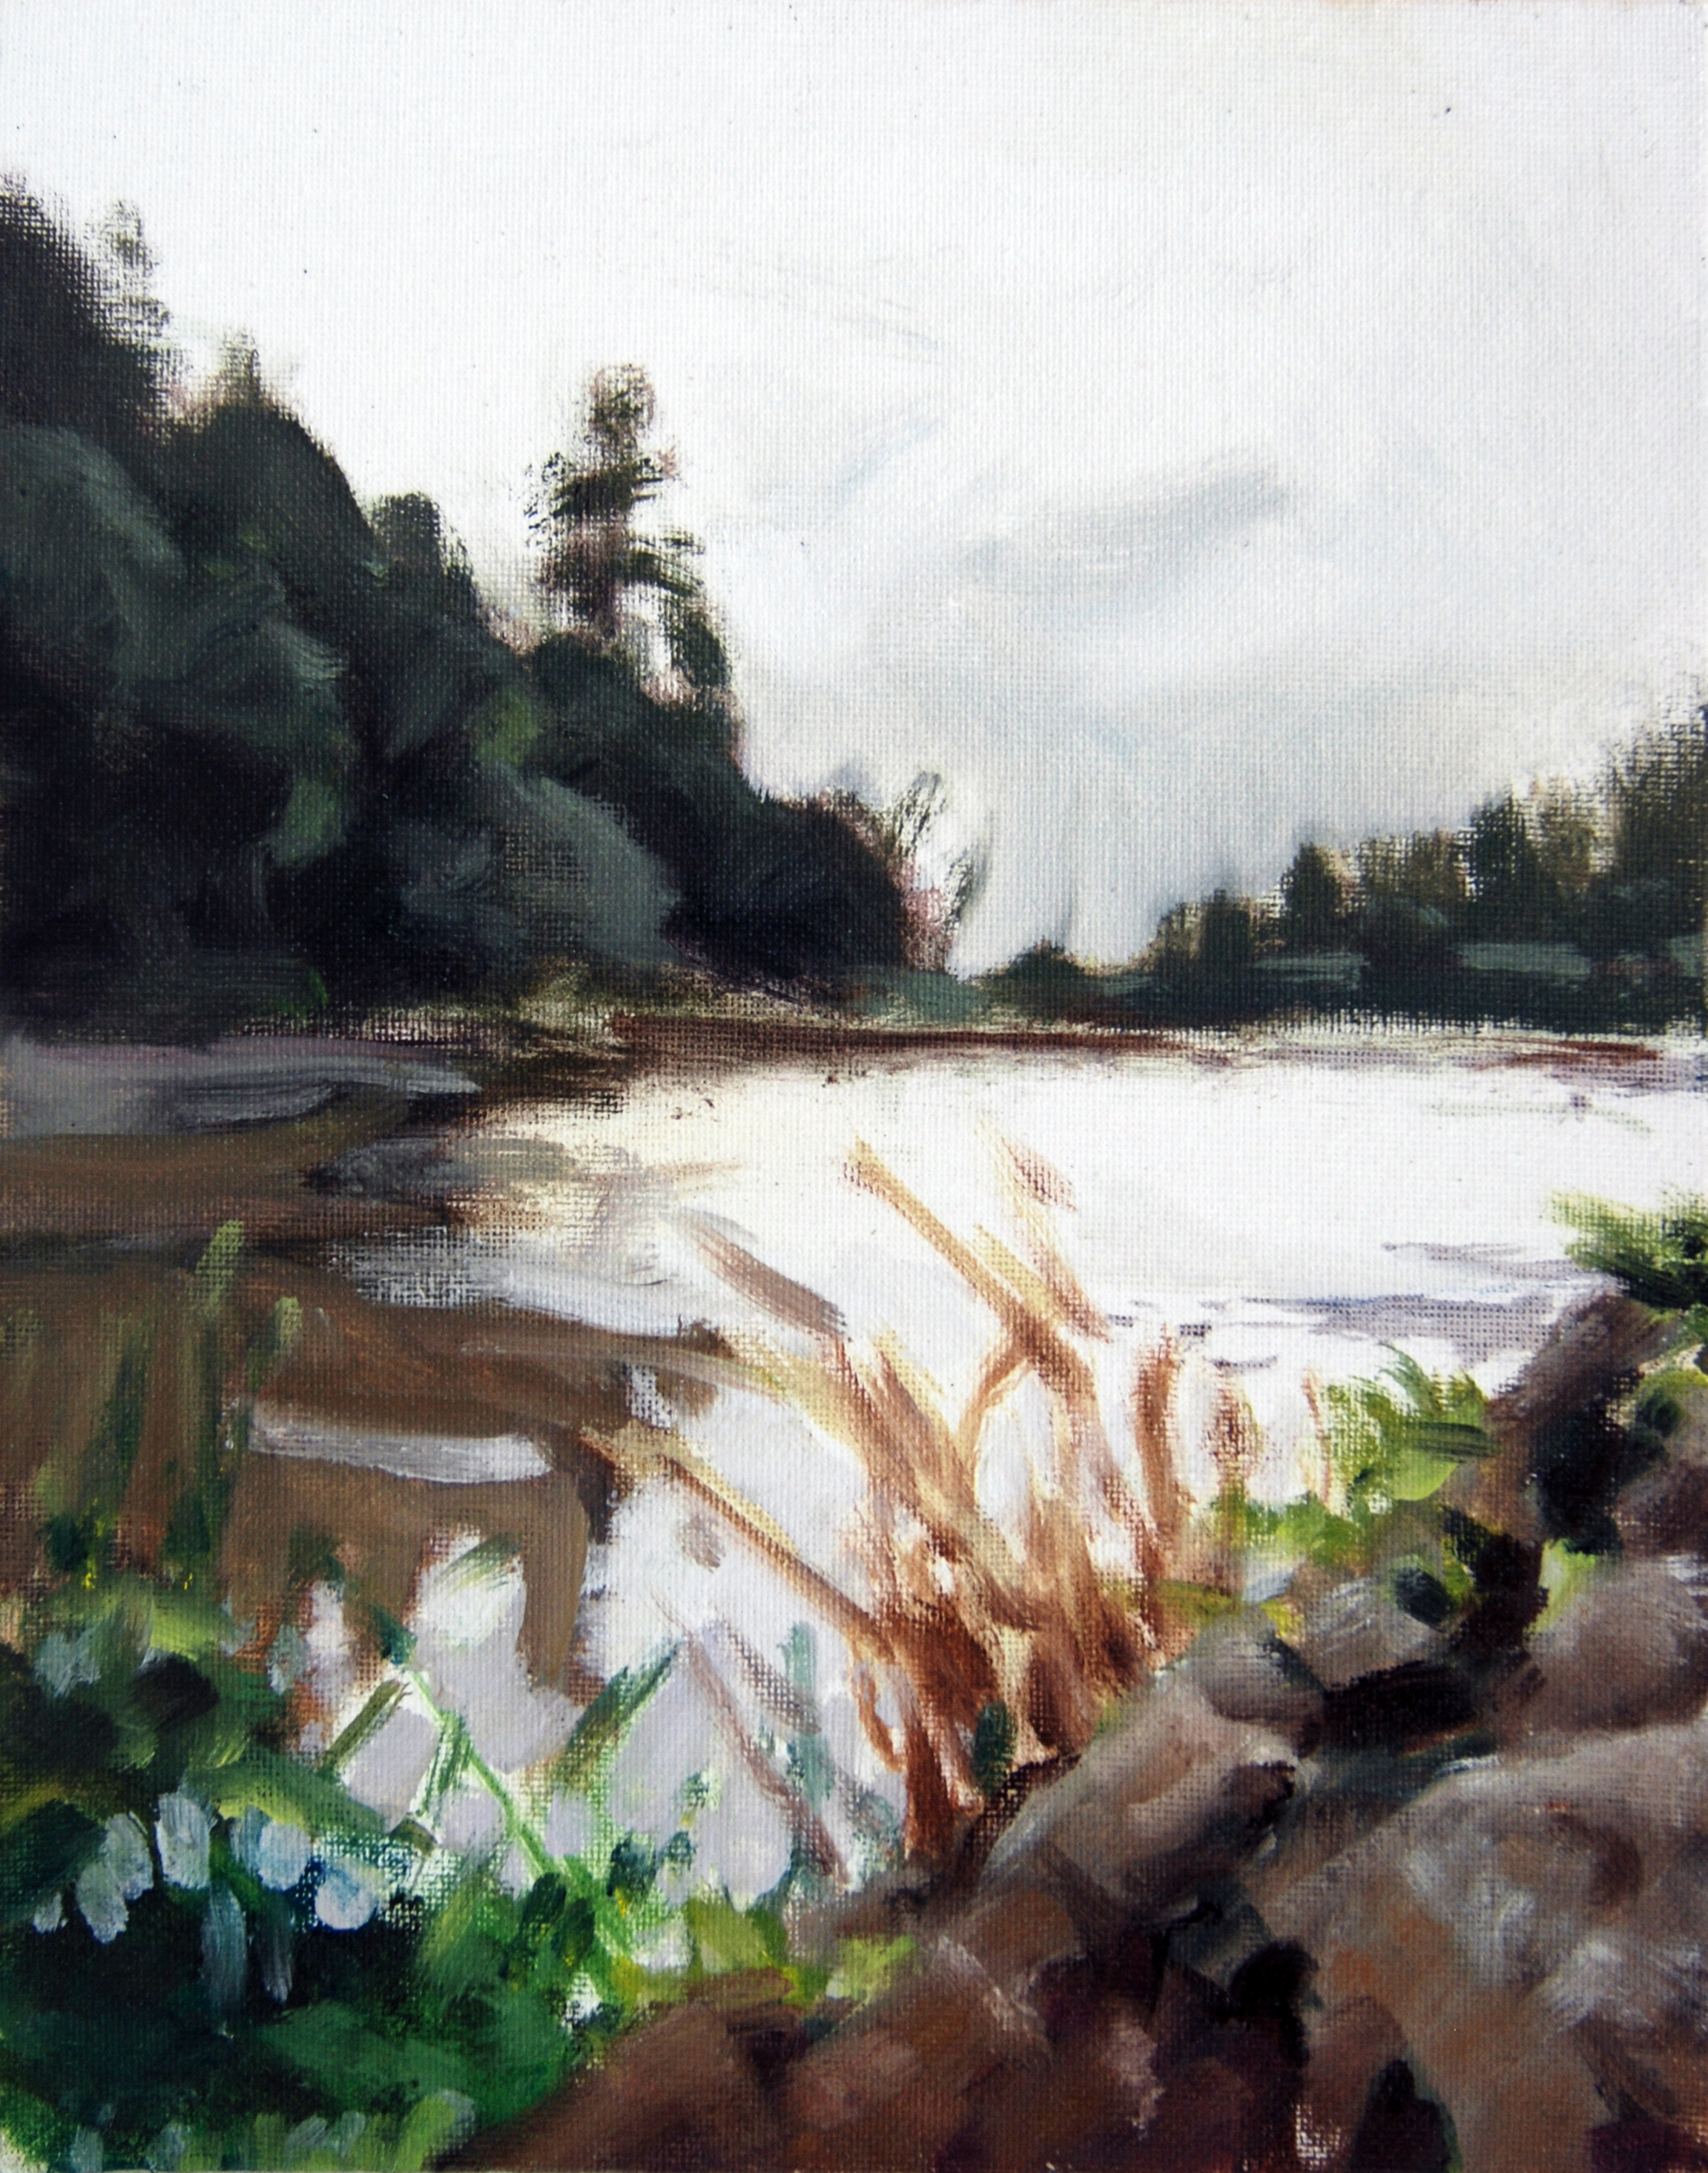   Lake Temescal, Overcast , 10 x 8 in.  Oil on canvas. Private collection. (2015) 